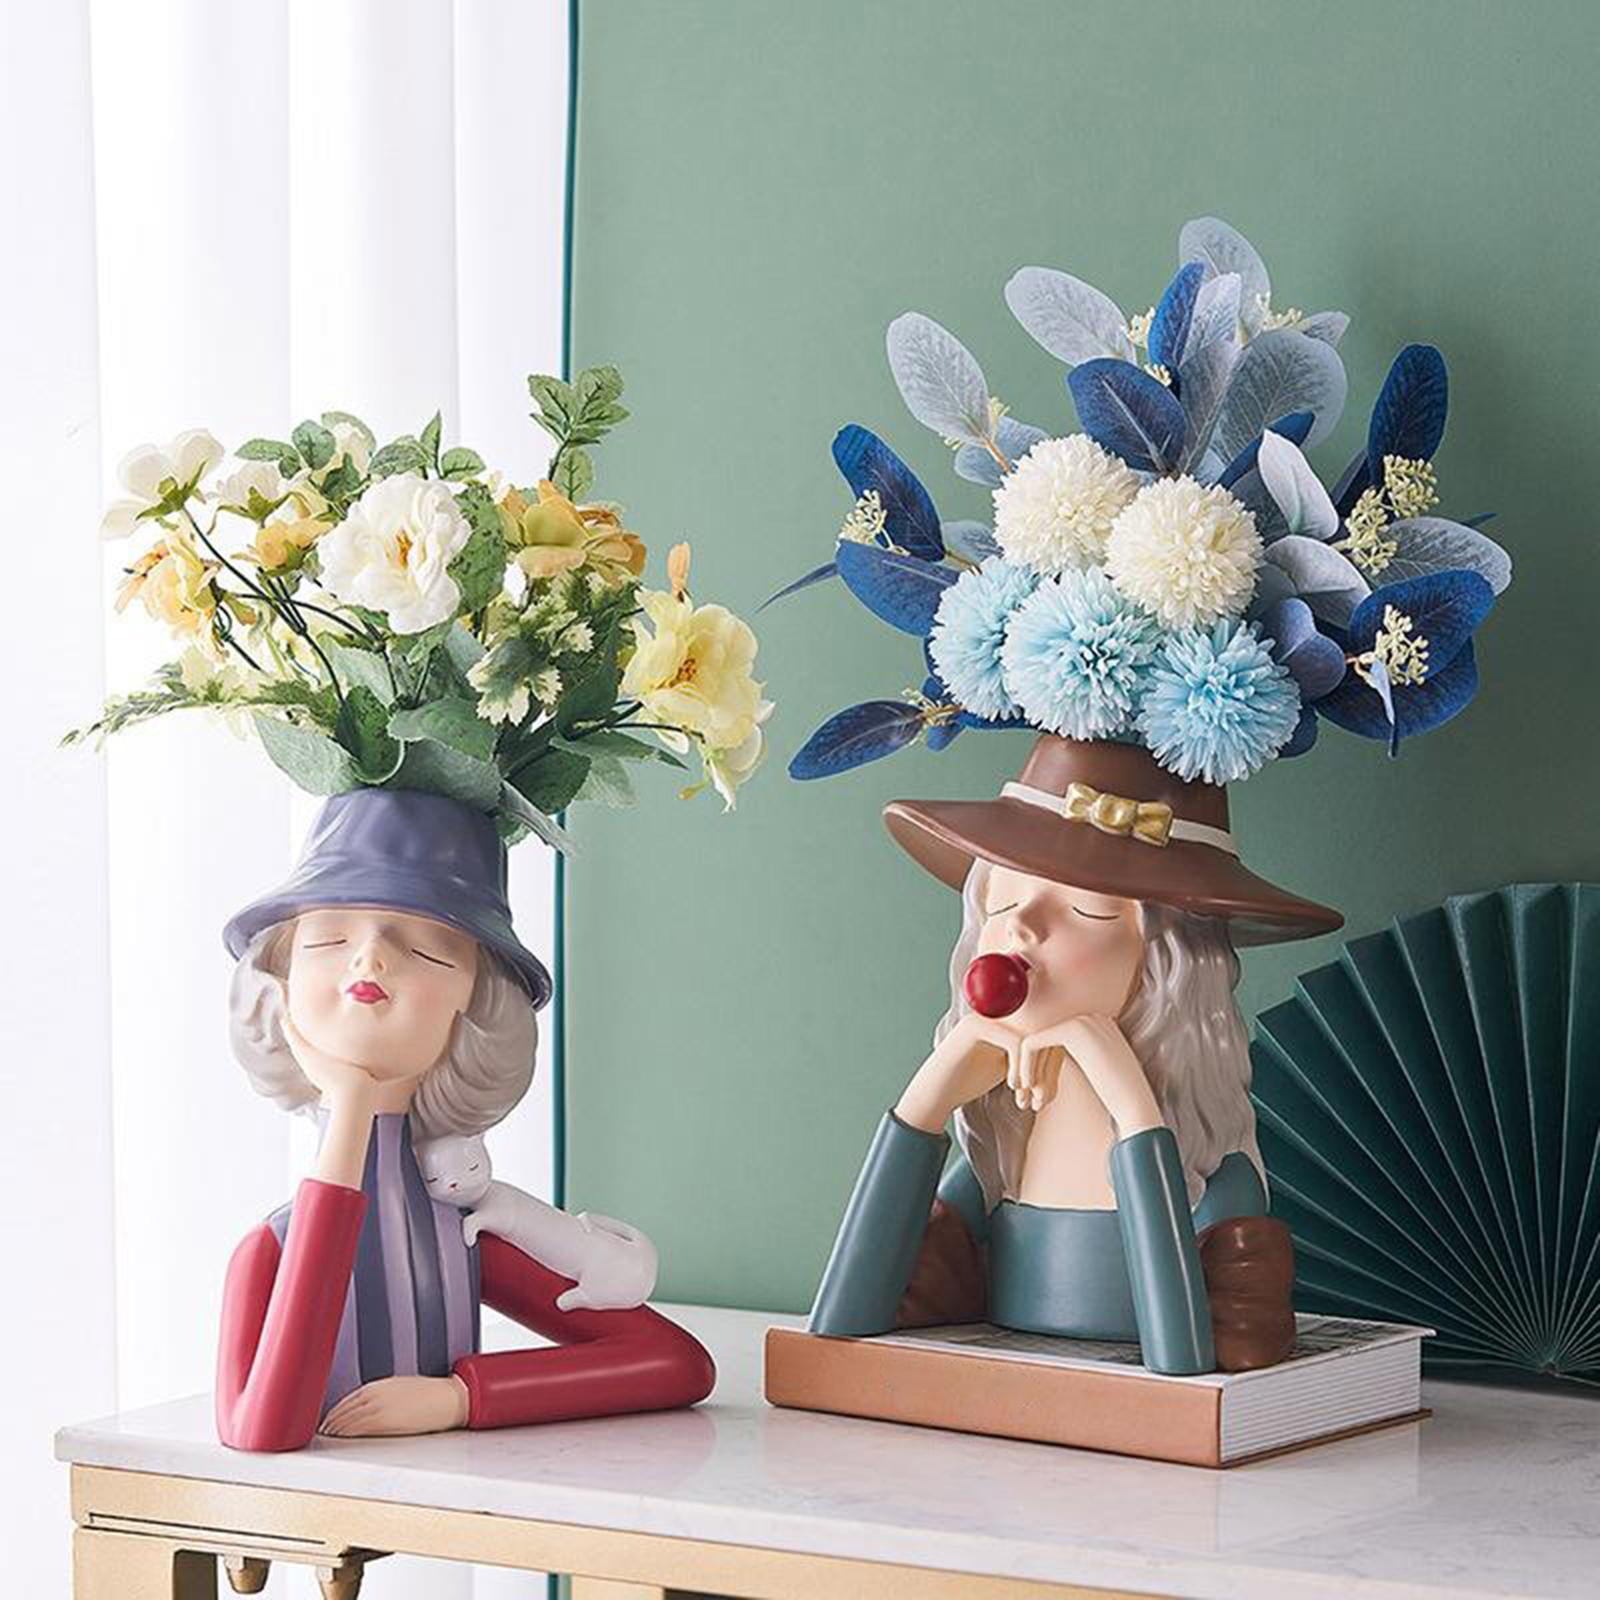 Green Baoblaze Blowing Gum Girl Flower Vase Ornaments Art Artificial Flower Dried Flowers Vase Home Room Dining Table Statue Decoration